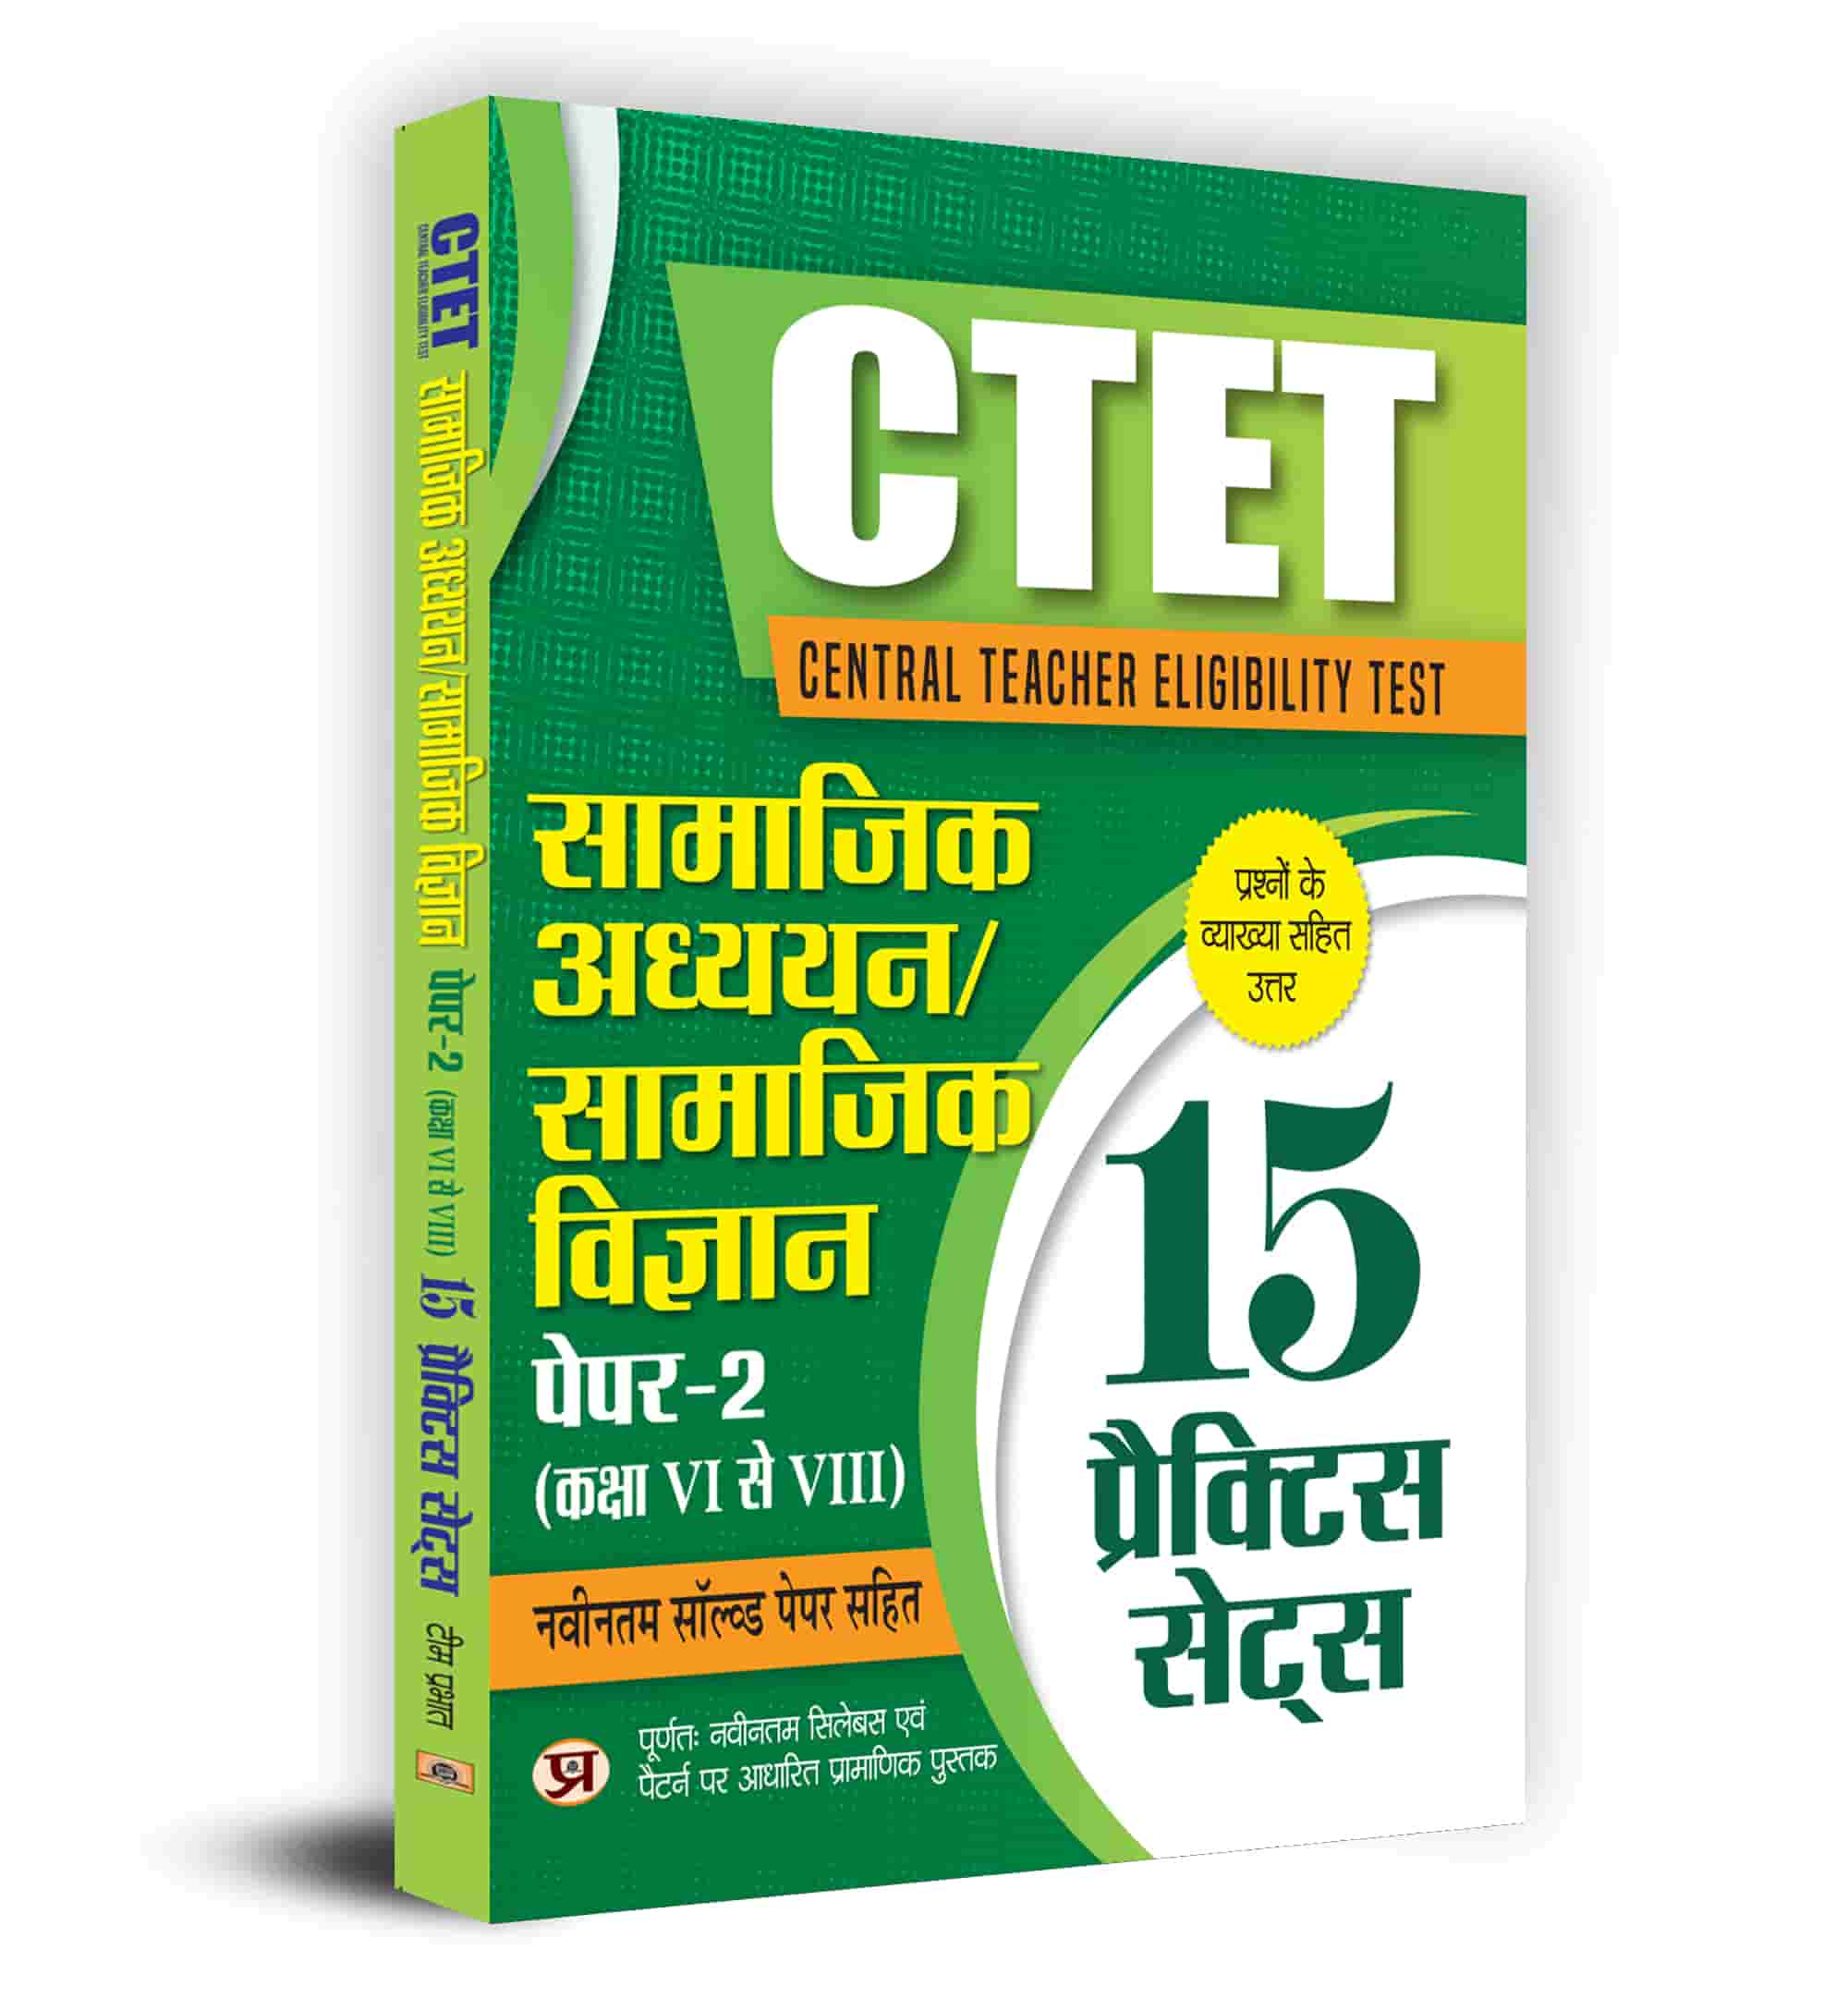 CTET Central Teacher Eligibility Test Paper - 2 (Class : Vi-Viii) Samajik Adhyayan/Samajik Vigyan (Social Science) 15 Practice Sets  with Latest Solved Papers